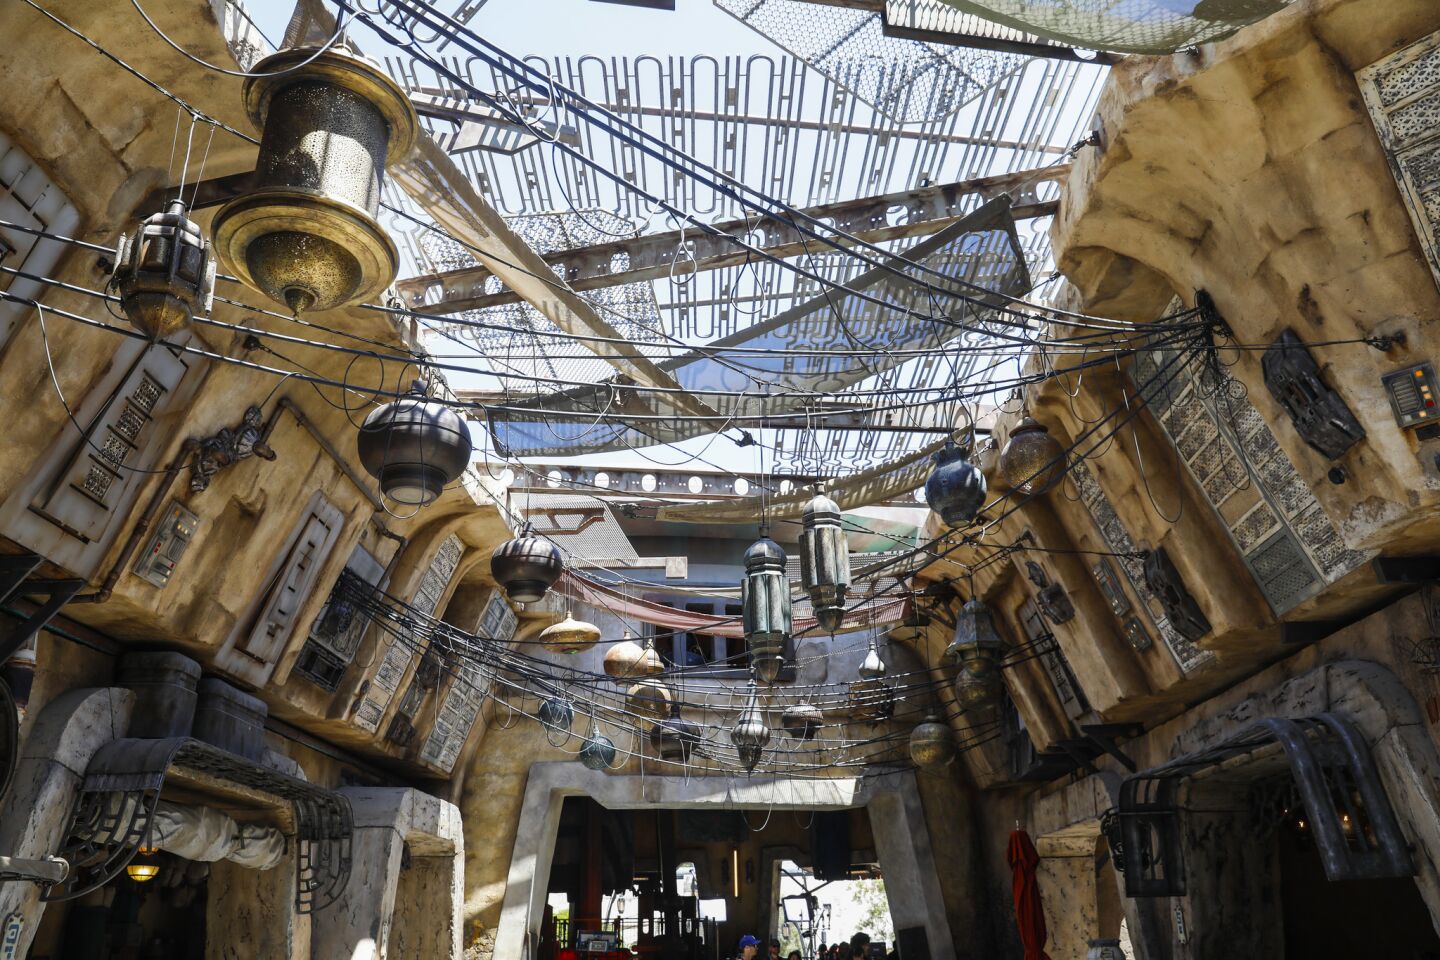 Inside the marketplace, where goods are sold as part of Star Wars: Galaxy's Edge.